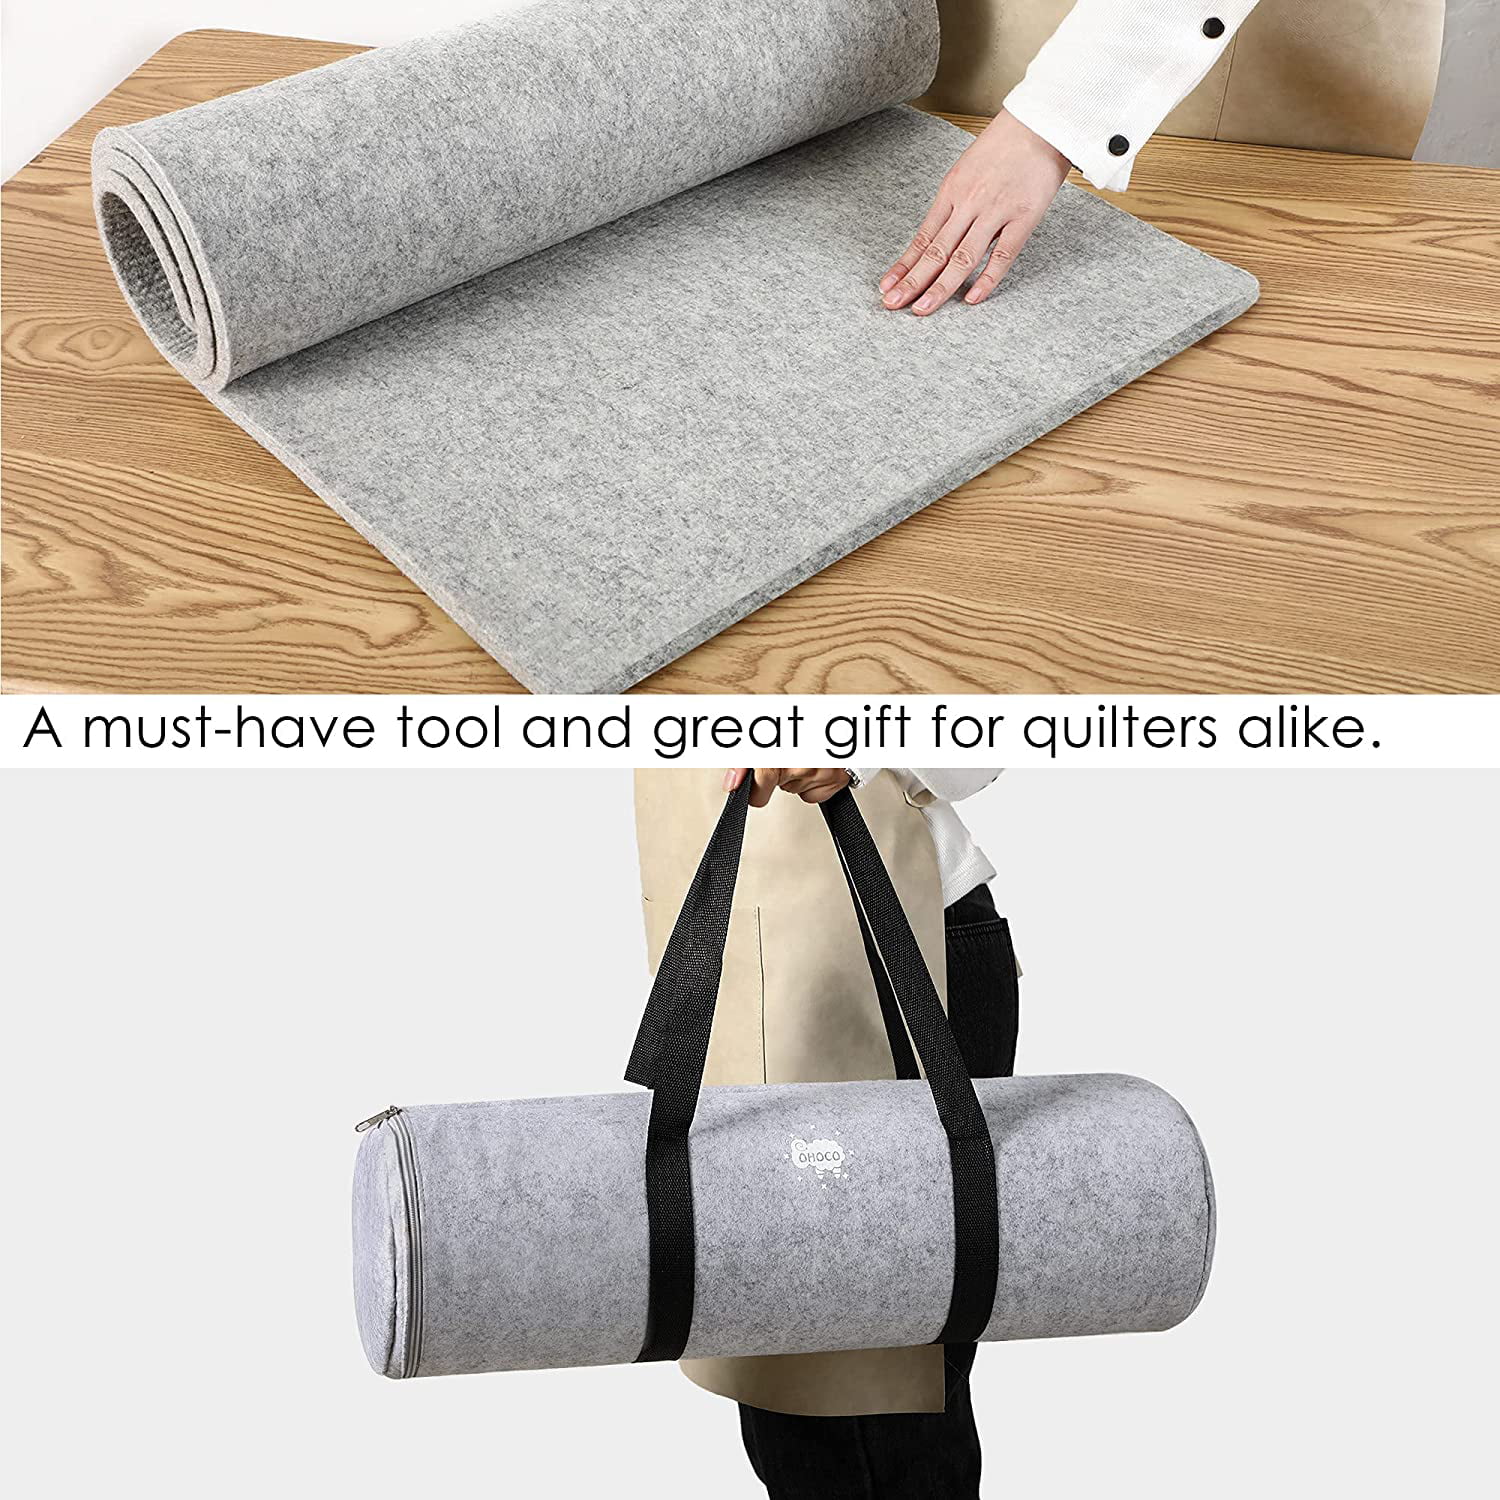 Wool Pressing Mat for Quilting - 22x60 XL Extra Large Felt Ironing